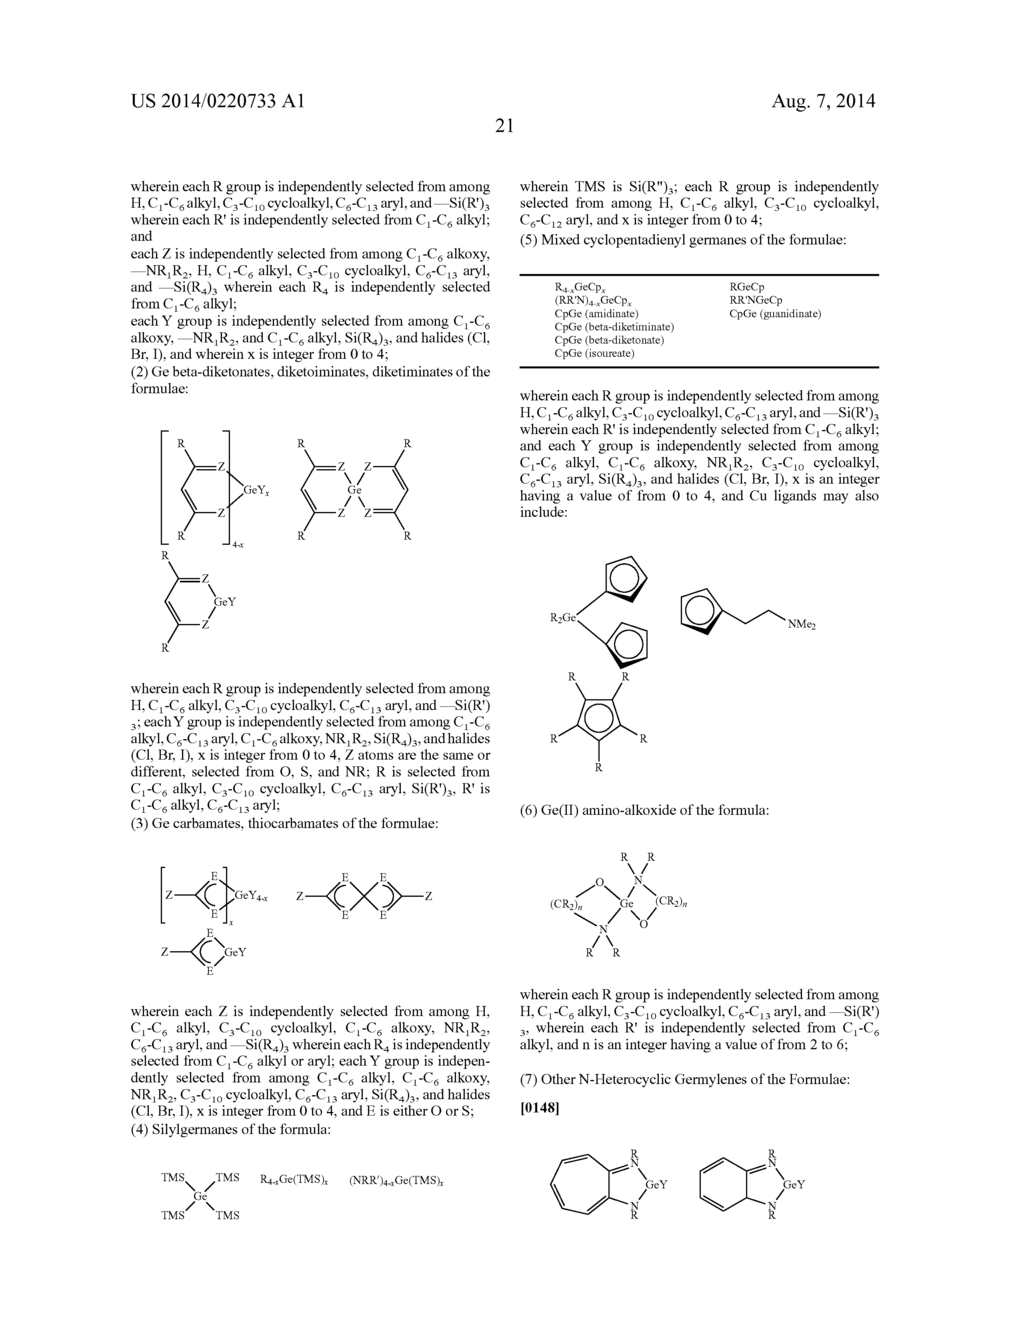 ANTIMONY AND GERMANIUM COMPLEXES USEFUL FOR CVD/ALD OF METAL THIN FILMS - diagram, schematic, and image 27